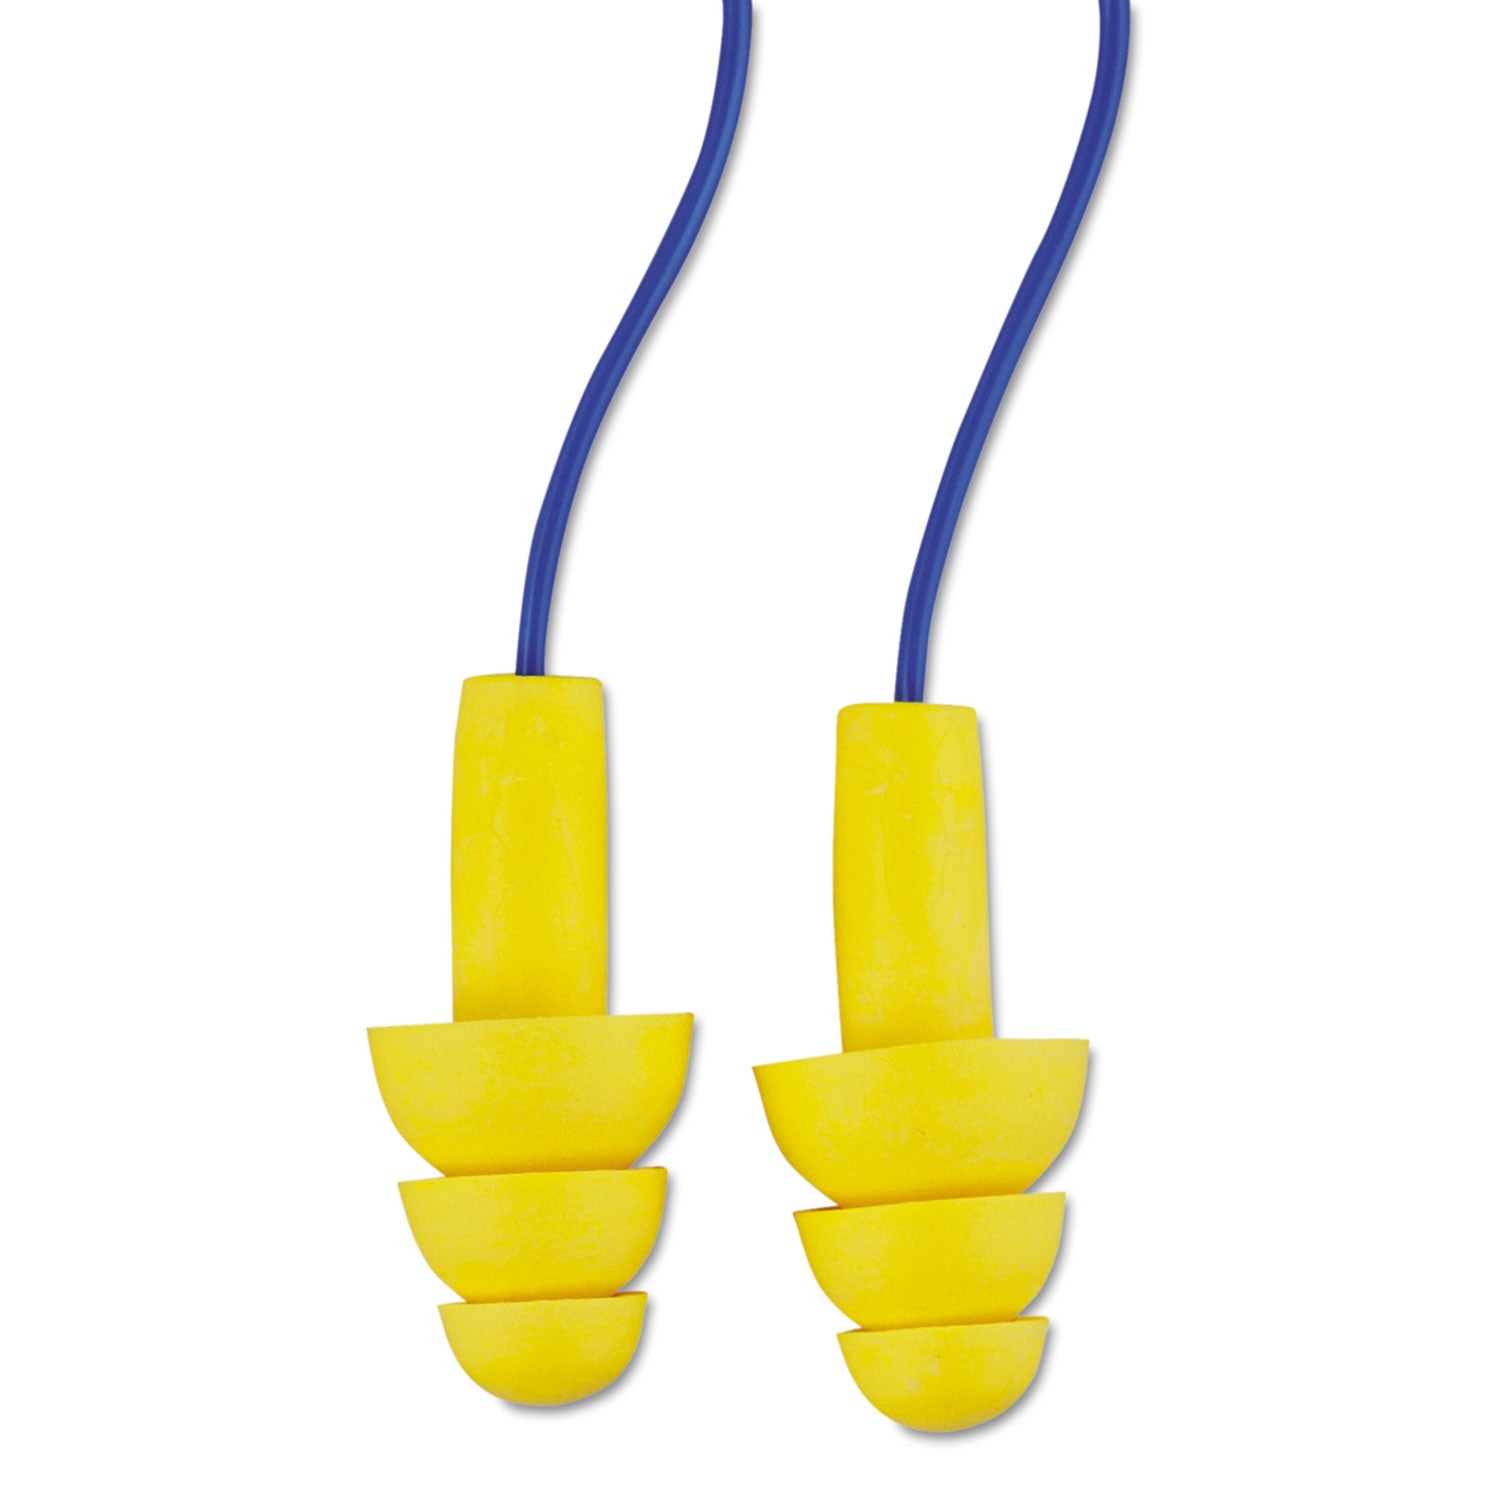 e-a-r-ultrafit-reusable-earplugs-corded-25-db-nrr-blue-yellow-200-pairs_mmm3404014 - 1